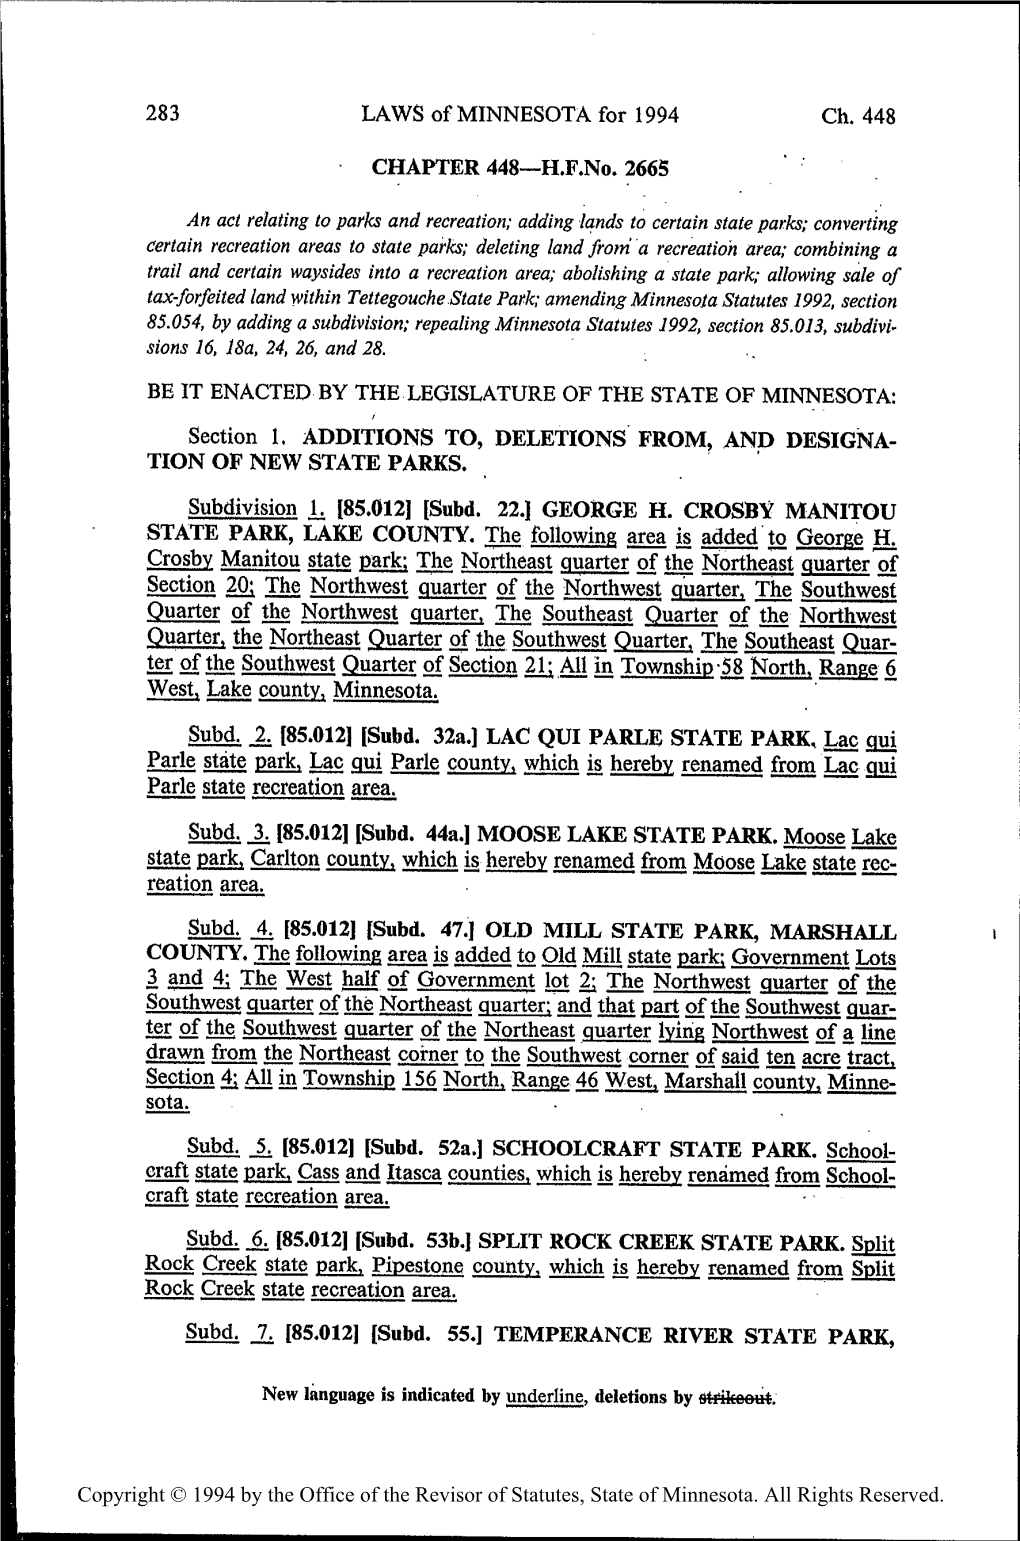 LAWS of MINNESOTA for 1994 TION of NEW STATE PARKS